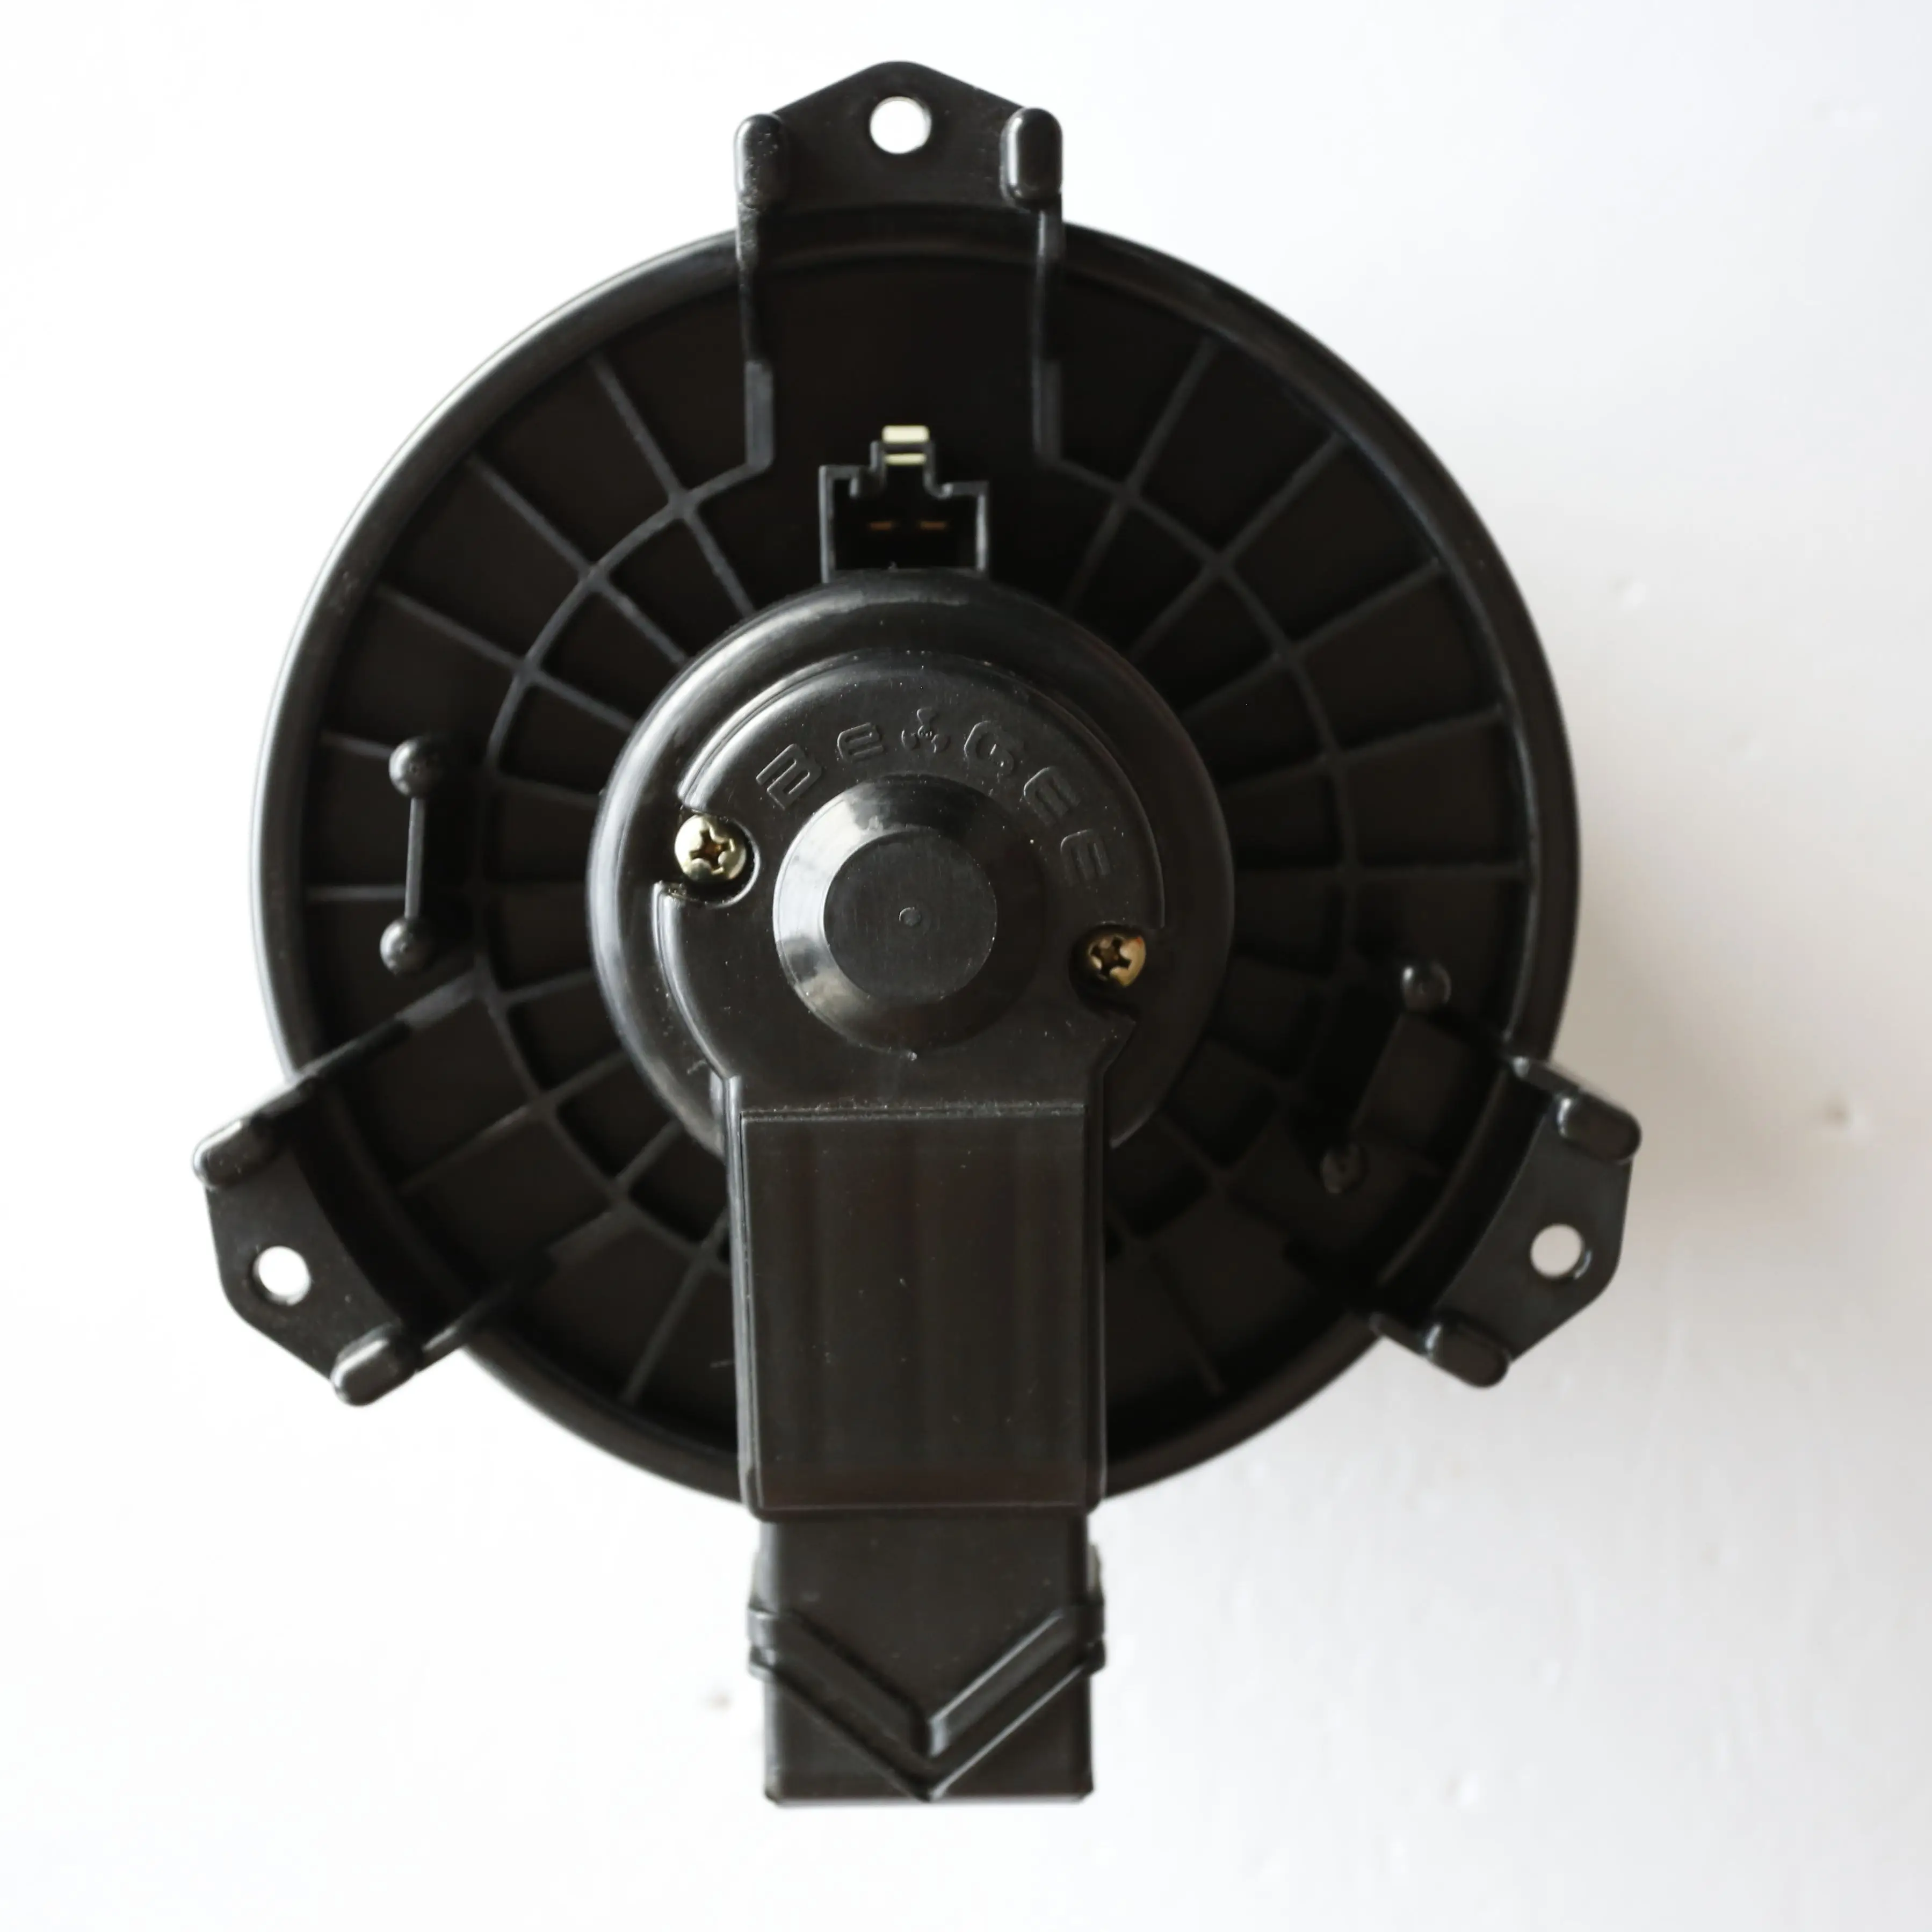 Wholesale Auto Air Conditioner Parts Ac Blower Fan Motor - Buy Blower